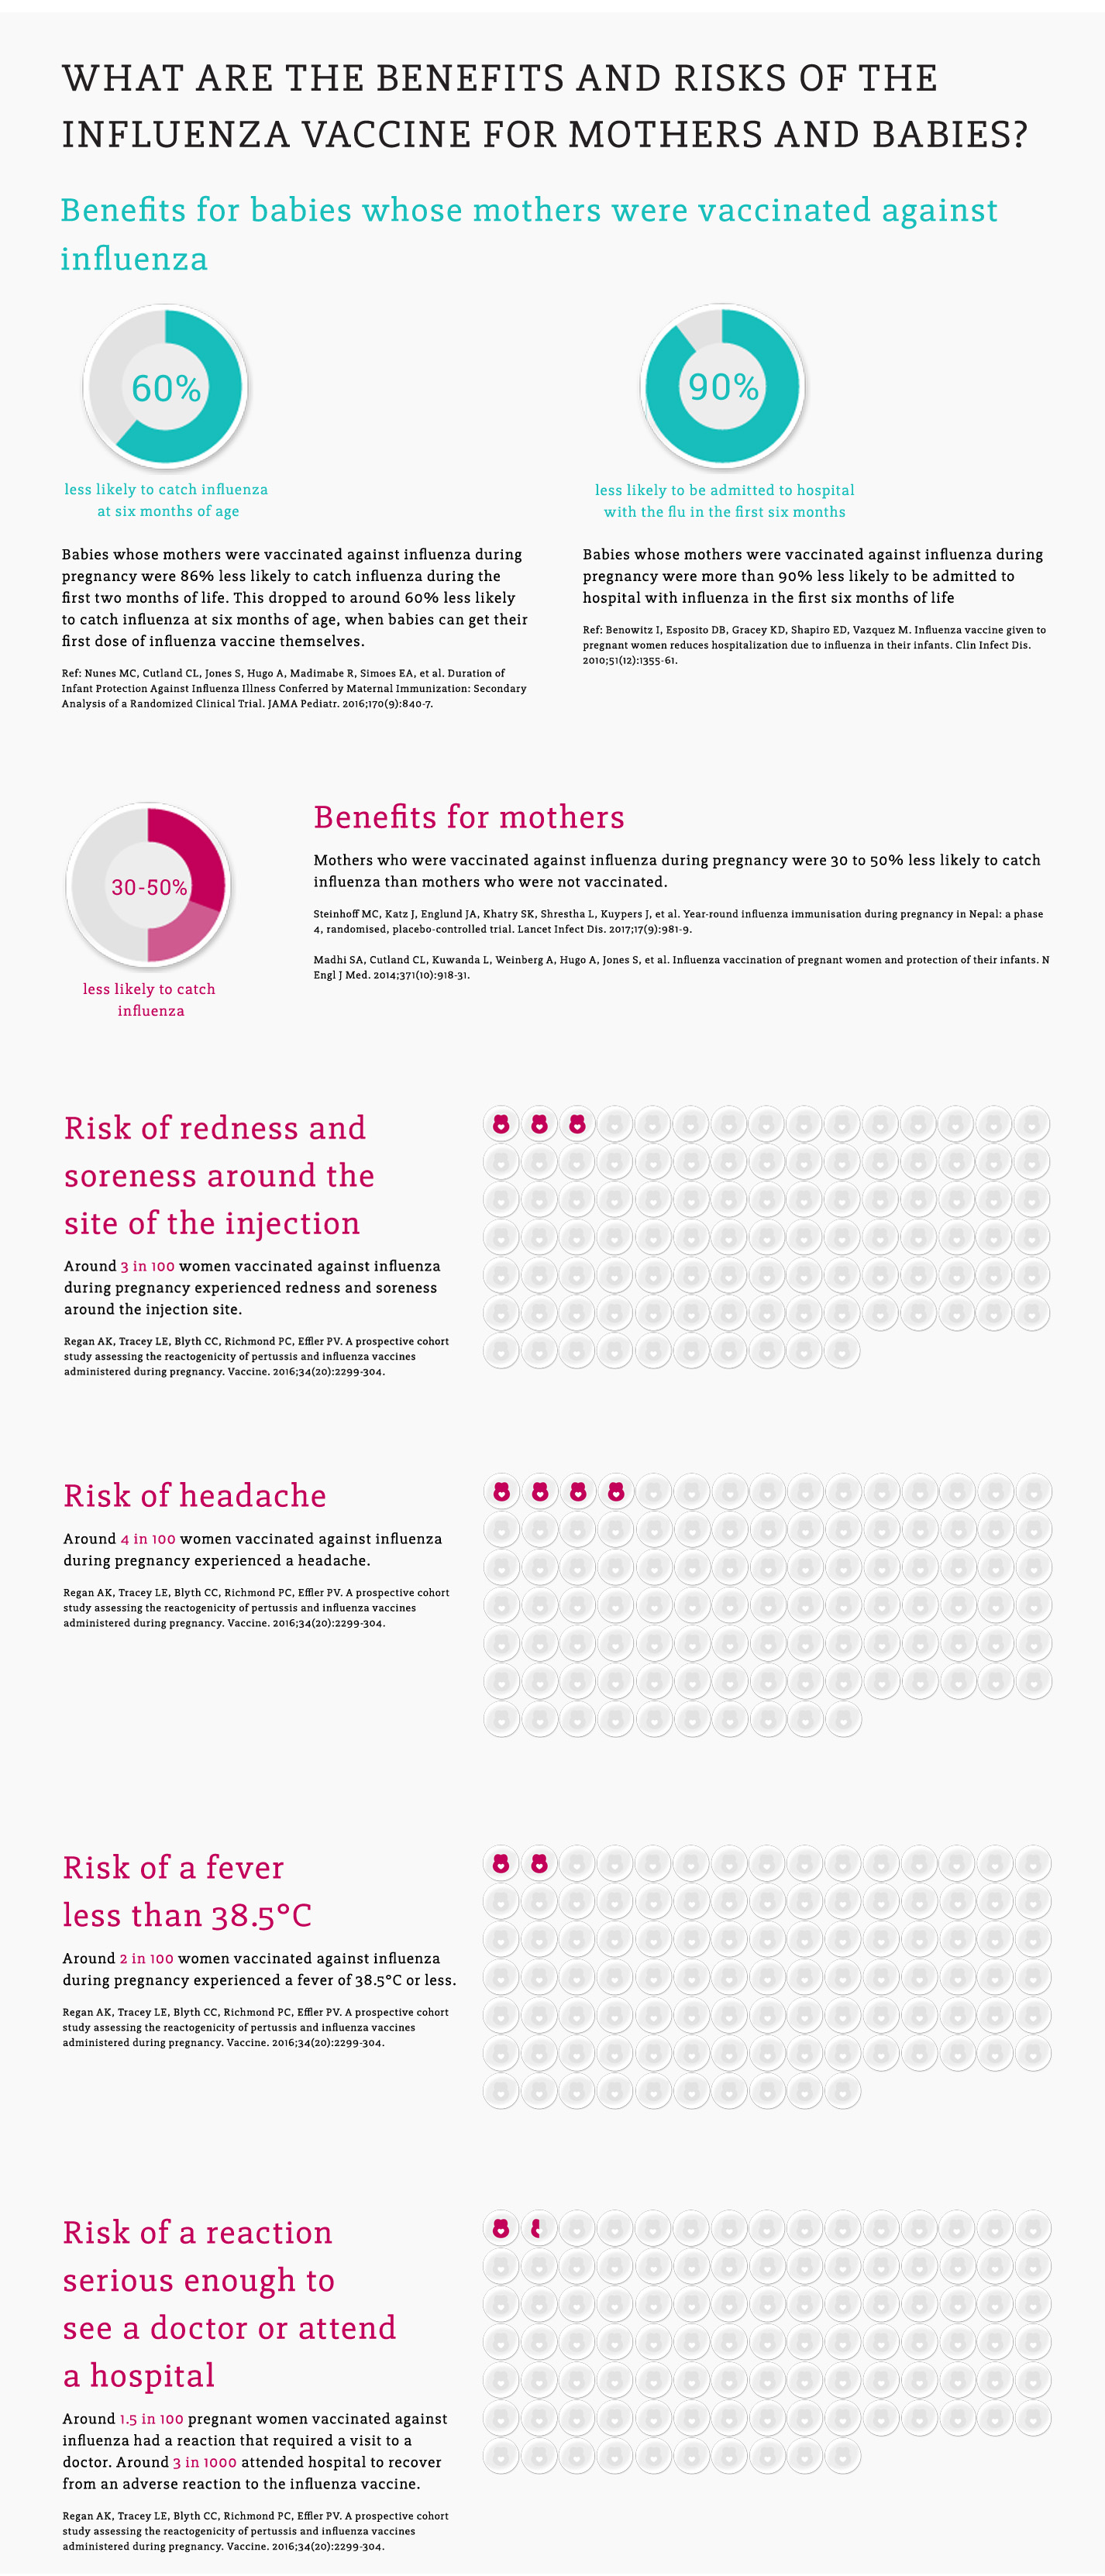 Infographic: Risks and benefits of the influenza vaccine